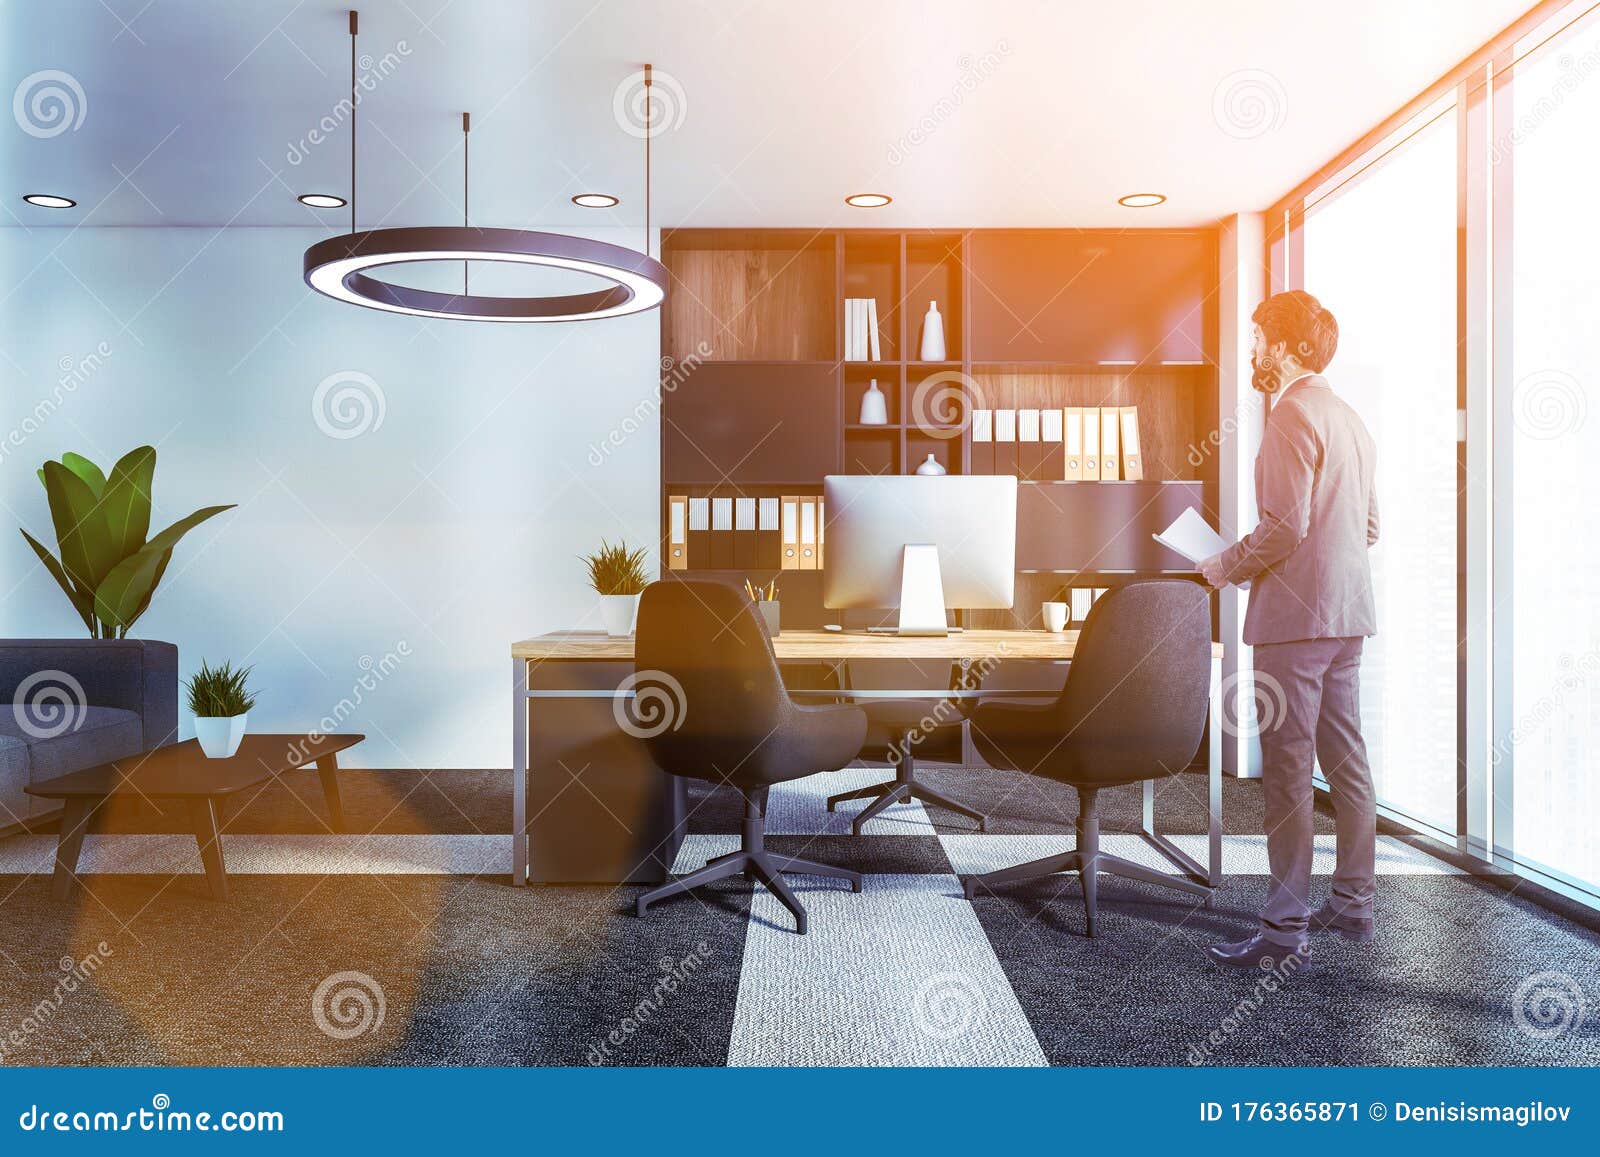 Businessman In Luxury Ceo Office Stock Image Image Of Gray Bookcase